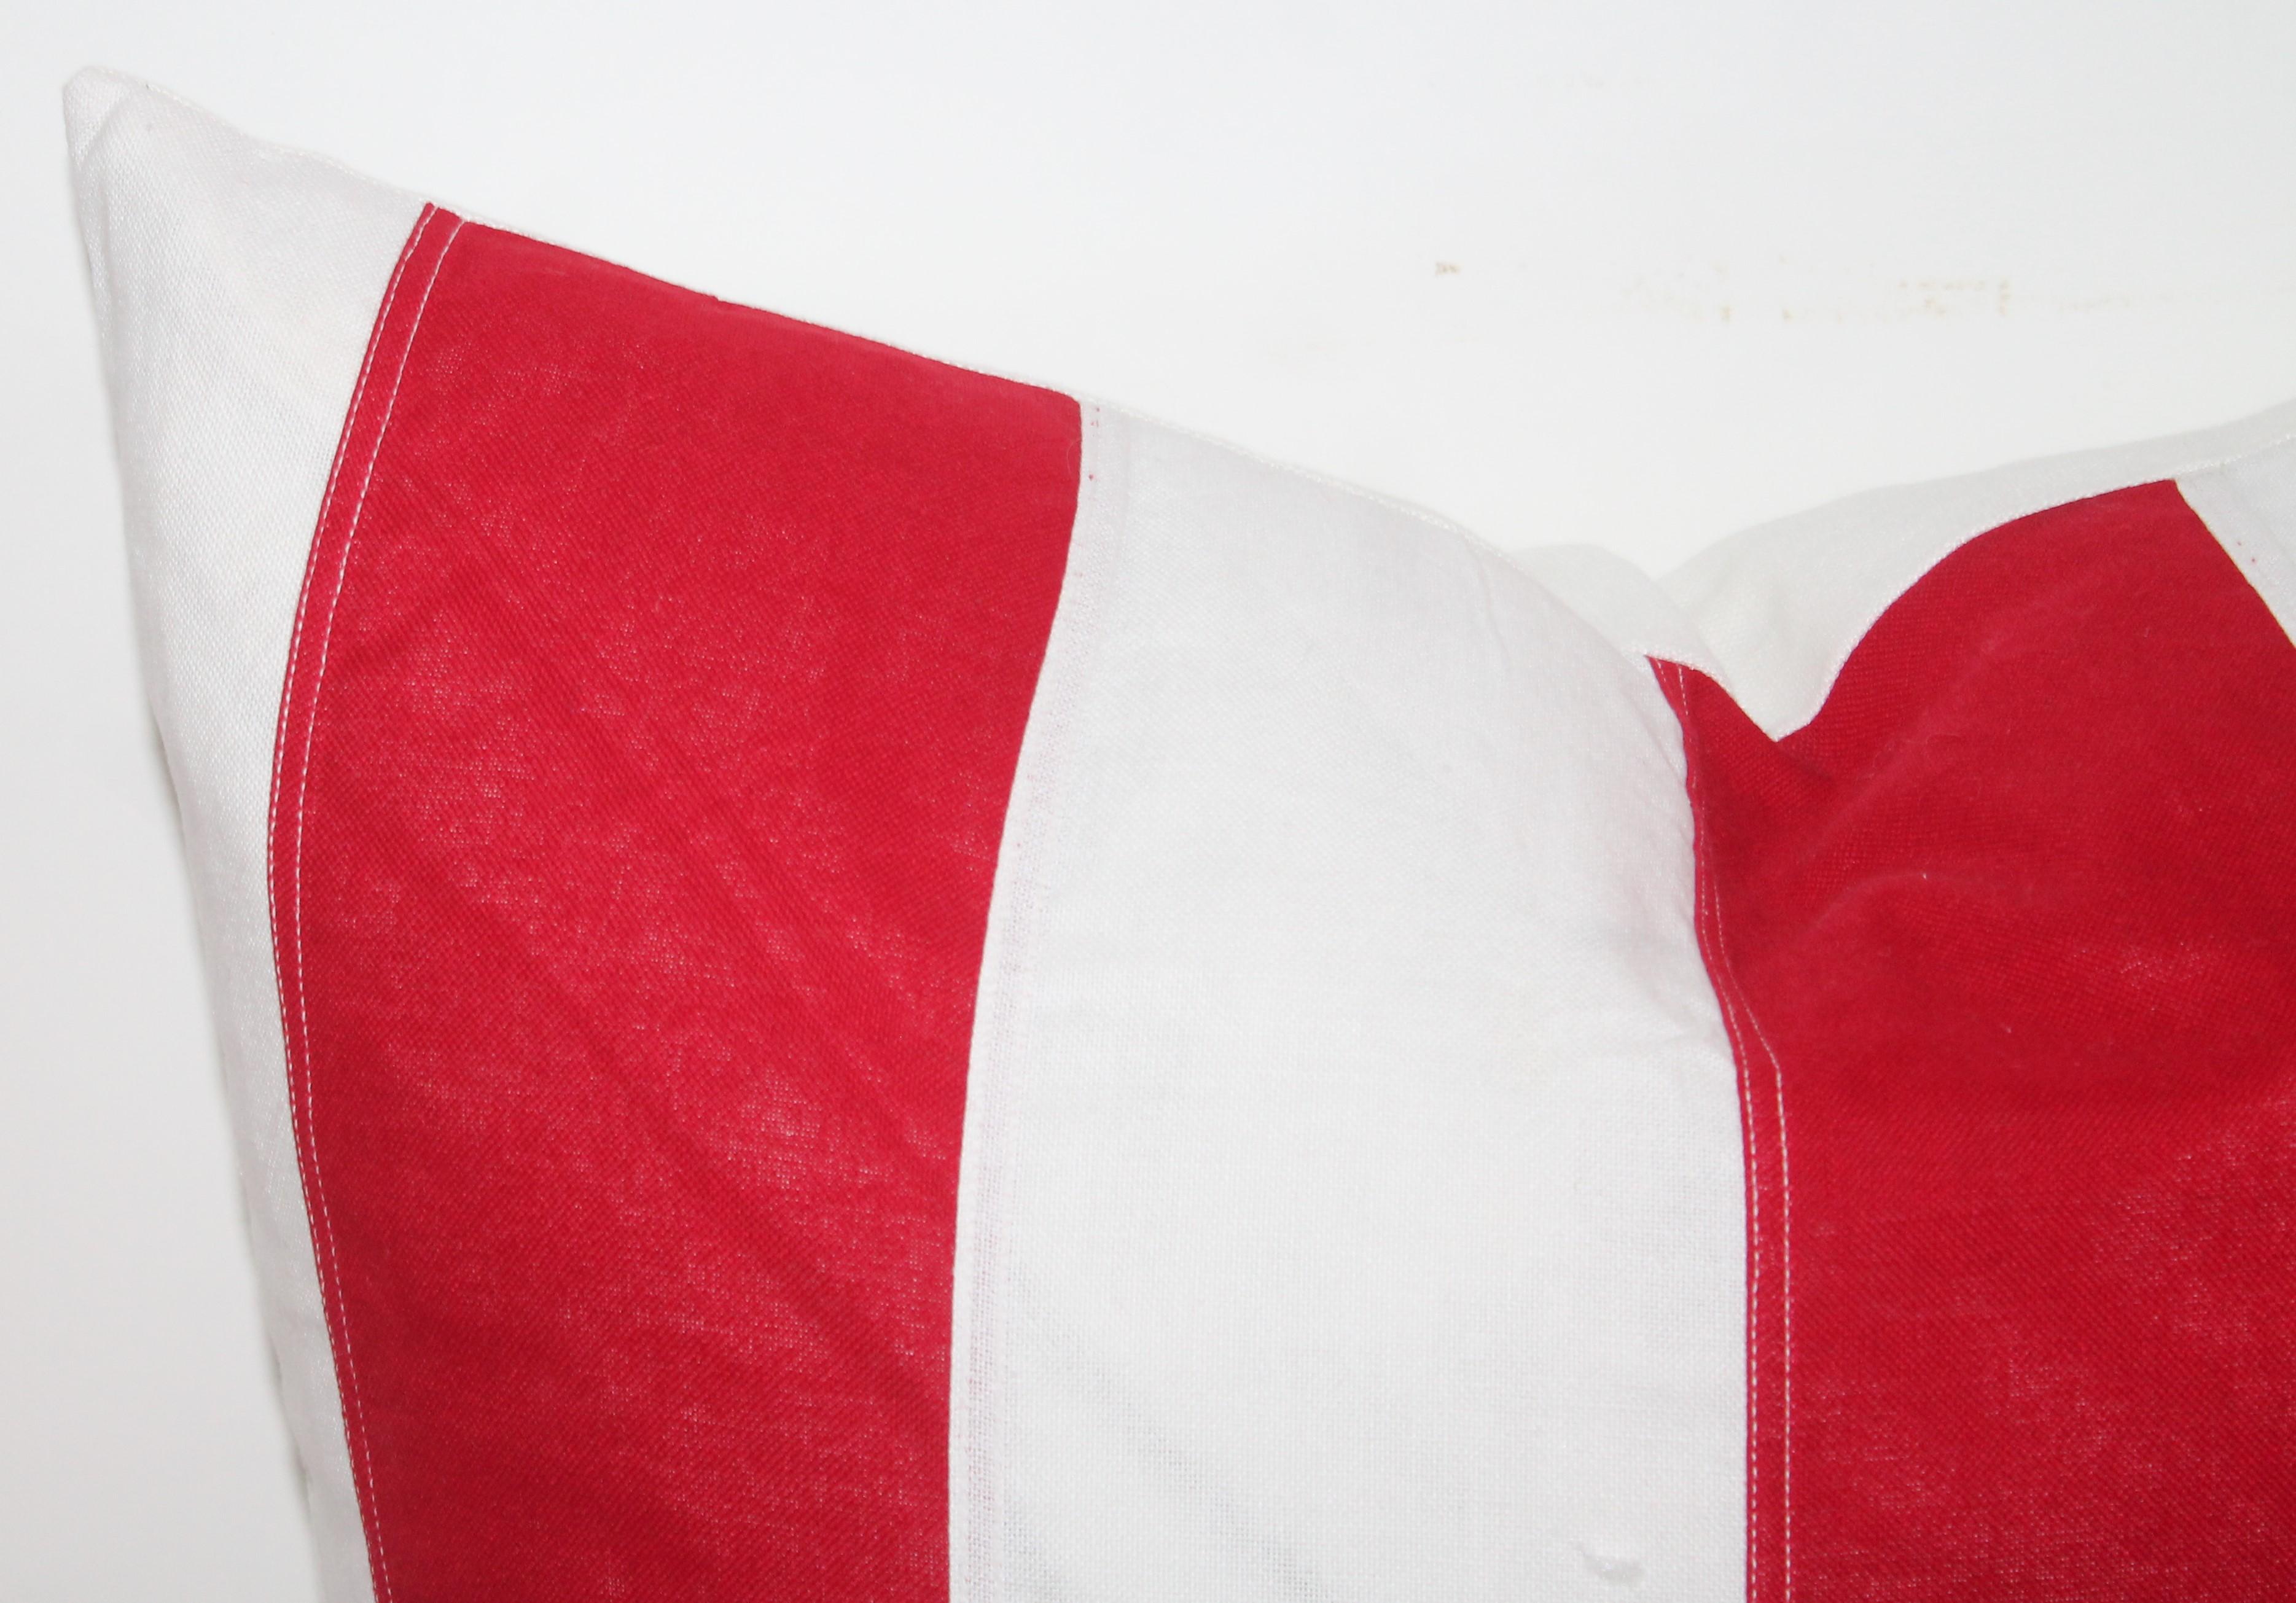 Vintage red and white flag pillows made from flag materials. Larger pillow

Measures 22 x 22 
Smaller pillow measures 20 x 20.